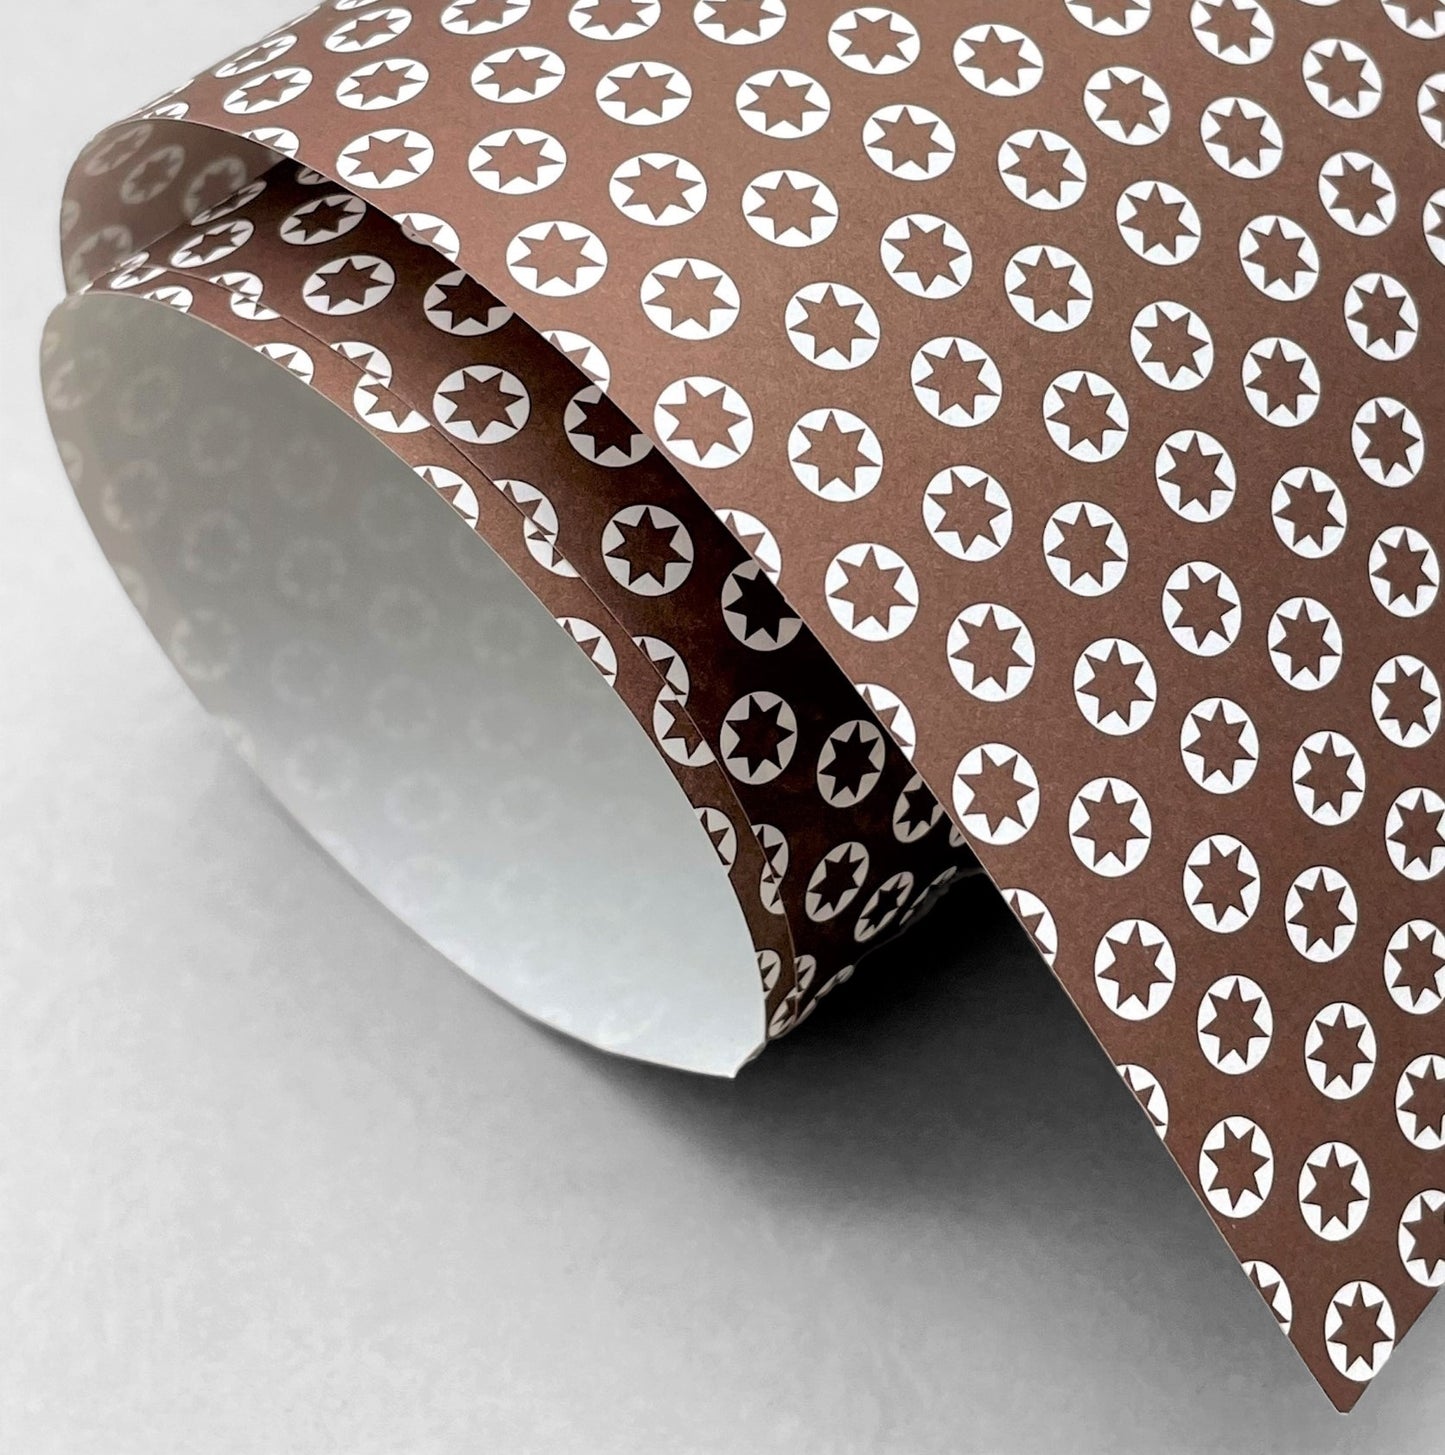 wrapping paper with an abstract tiny stars pattern in chestnut brown and white by Ola Studio